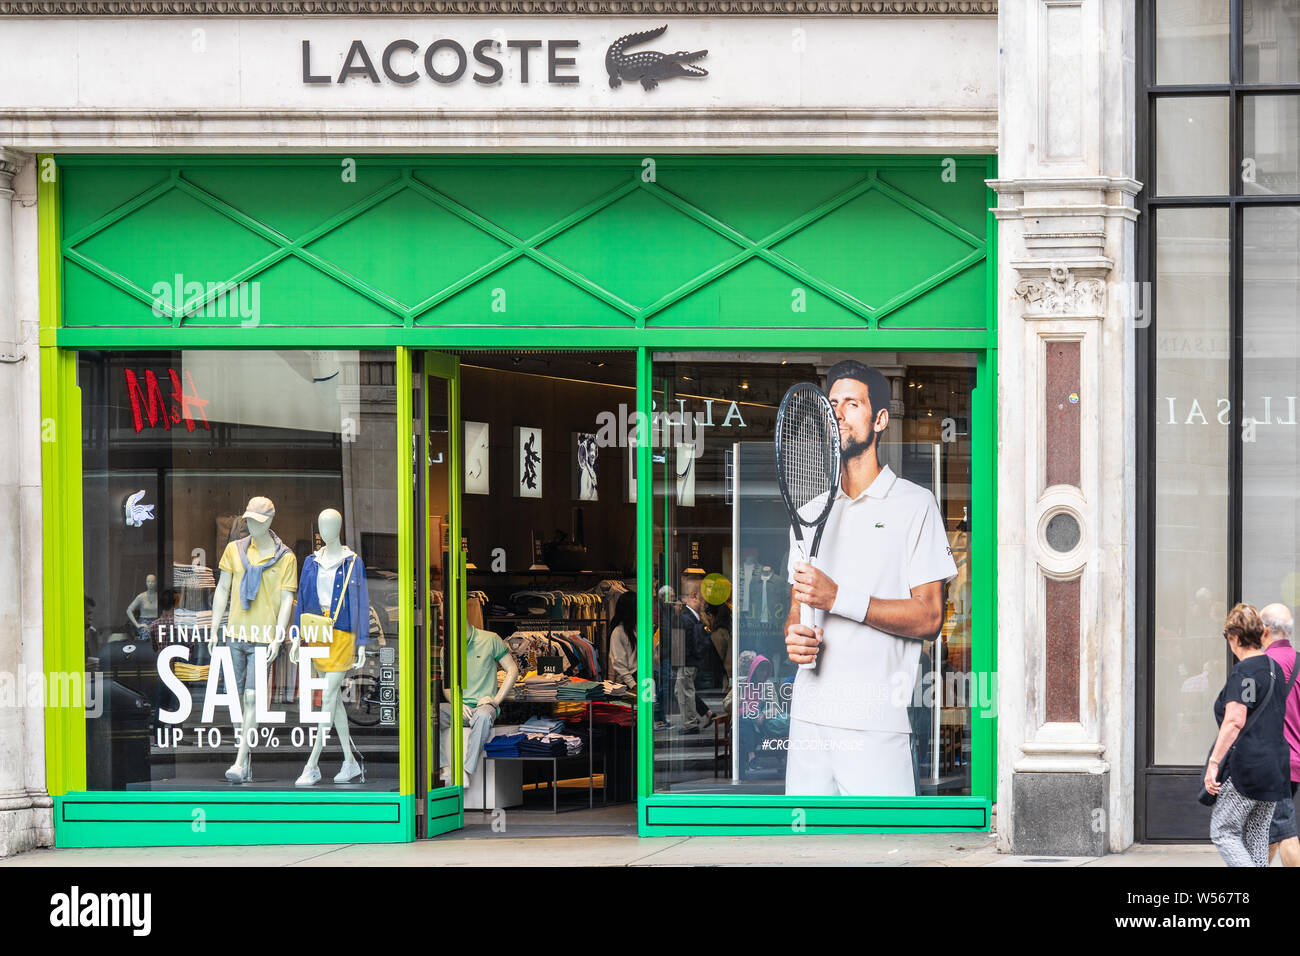 AJF,lacoste stores in uk,abrasgroup.com